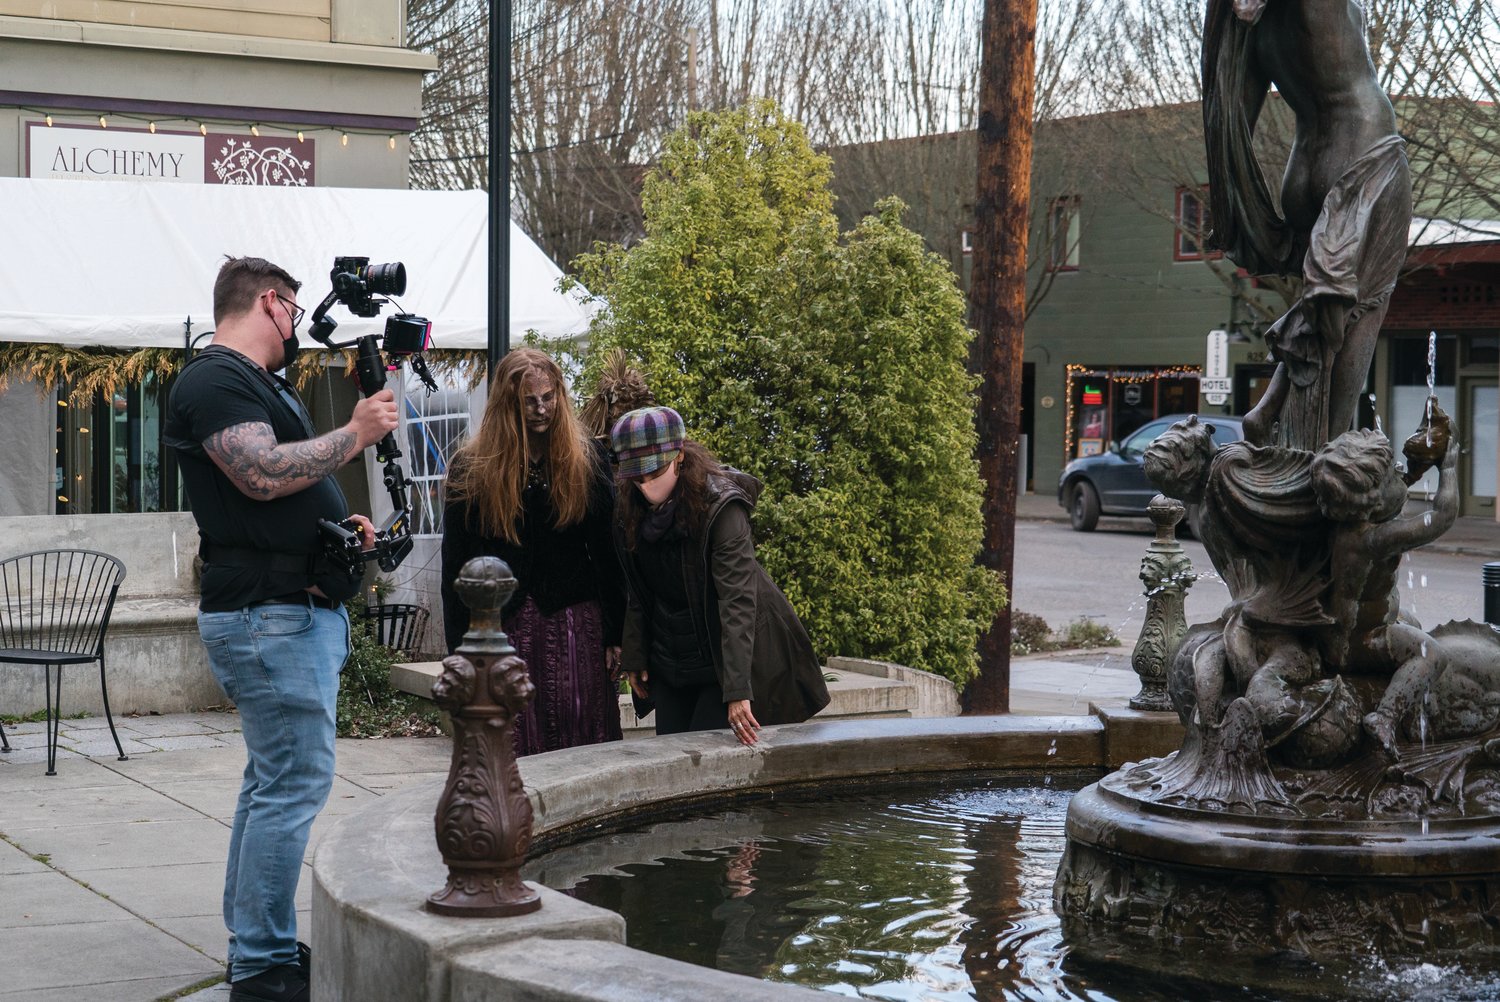 Director Maria Collette Sundeen shot most of the film’s scenes in downtown Port Townsend. Here, Sundeen instructs her actor for a scene shot at the Haller Fountain on Washington Street.